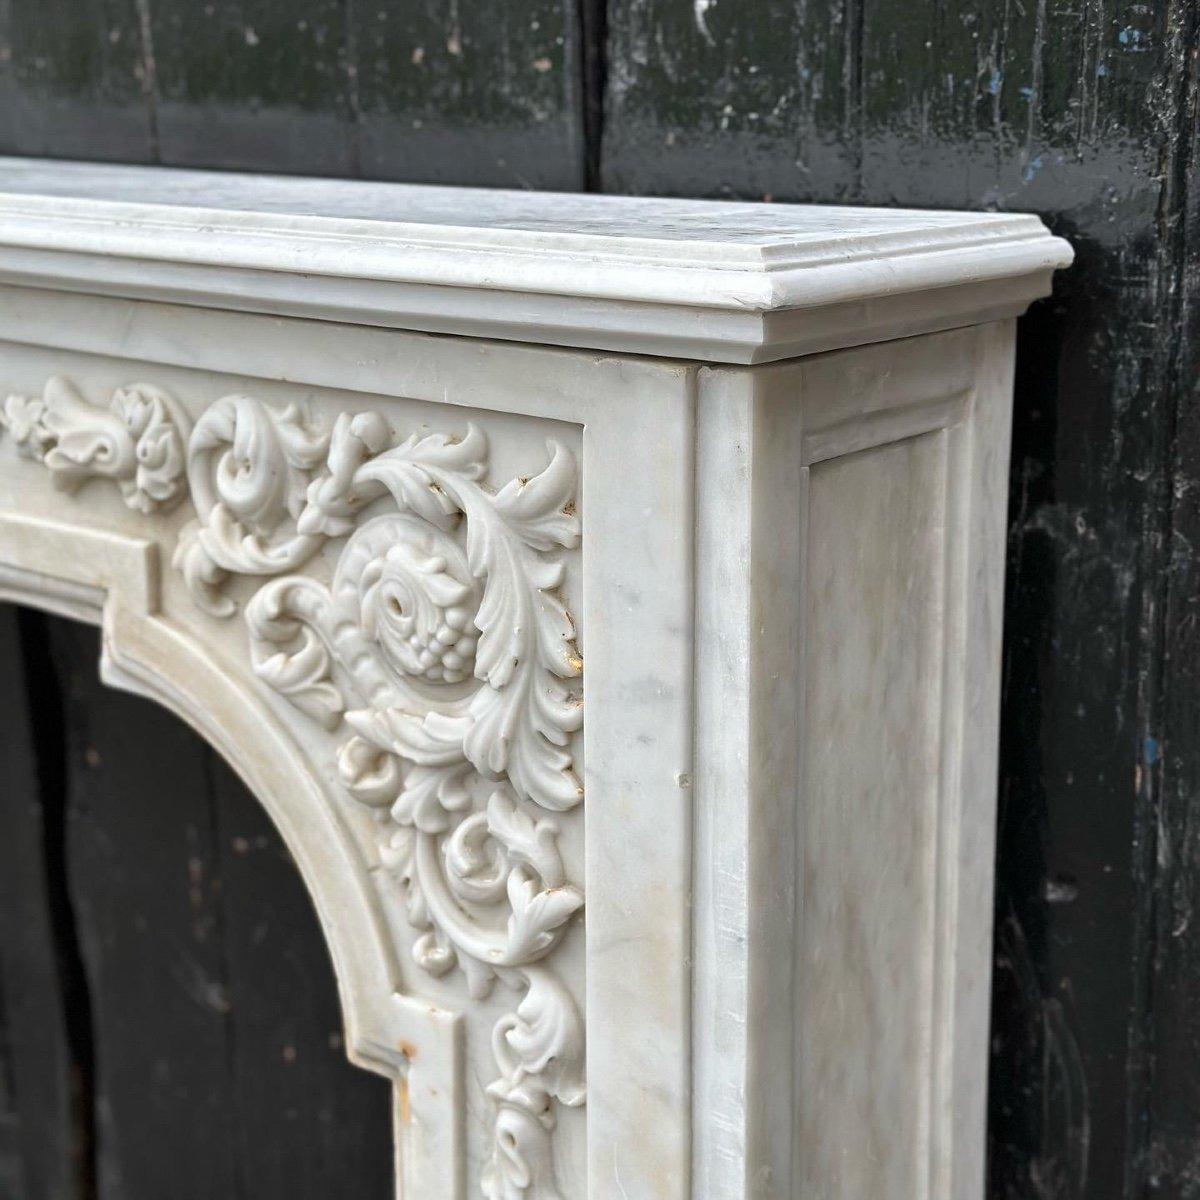 Carrara marble fireplace fireplace dimensions 73.5 x 110.5cm